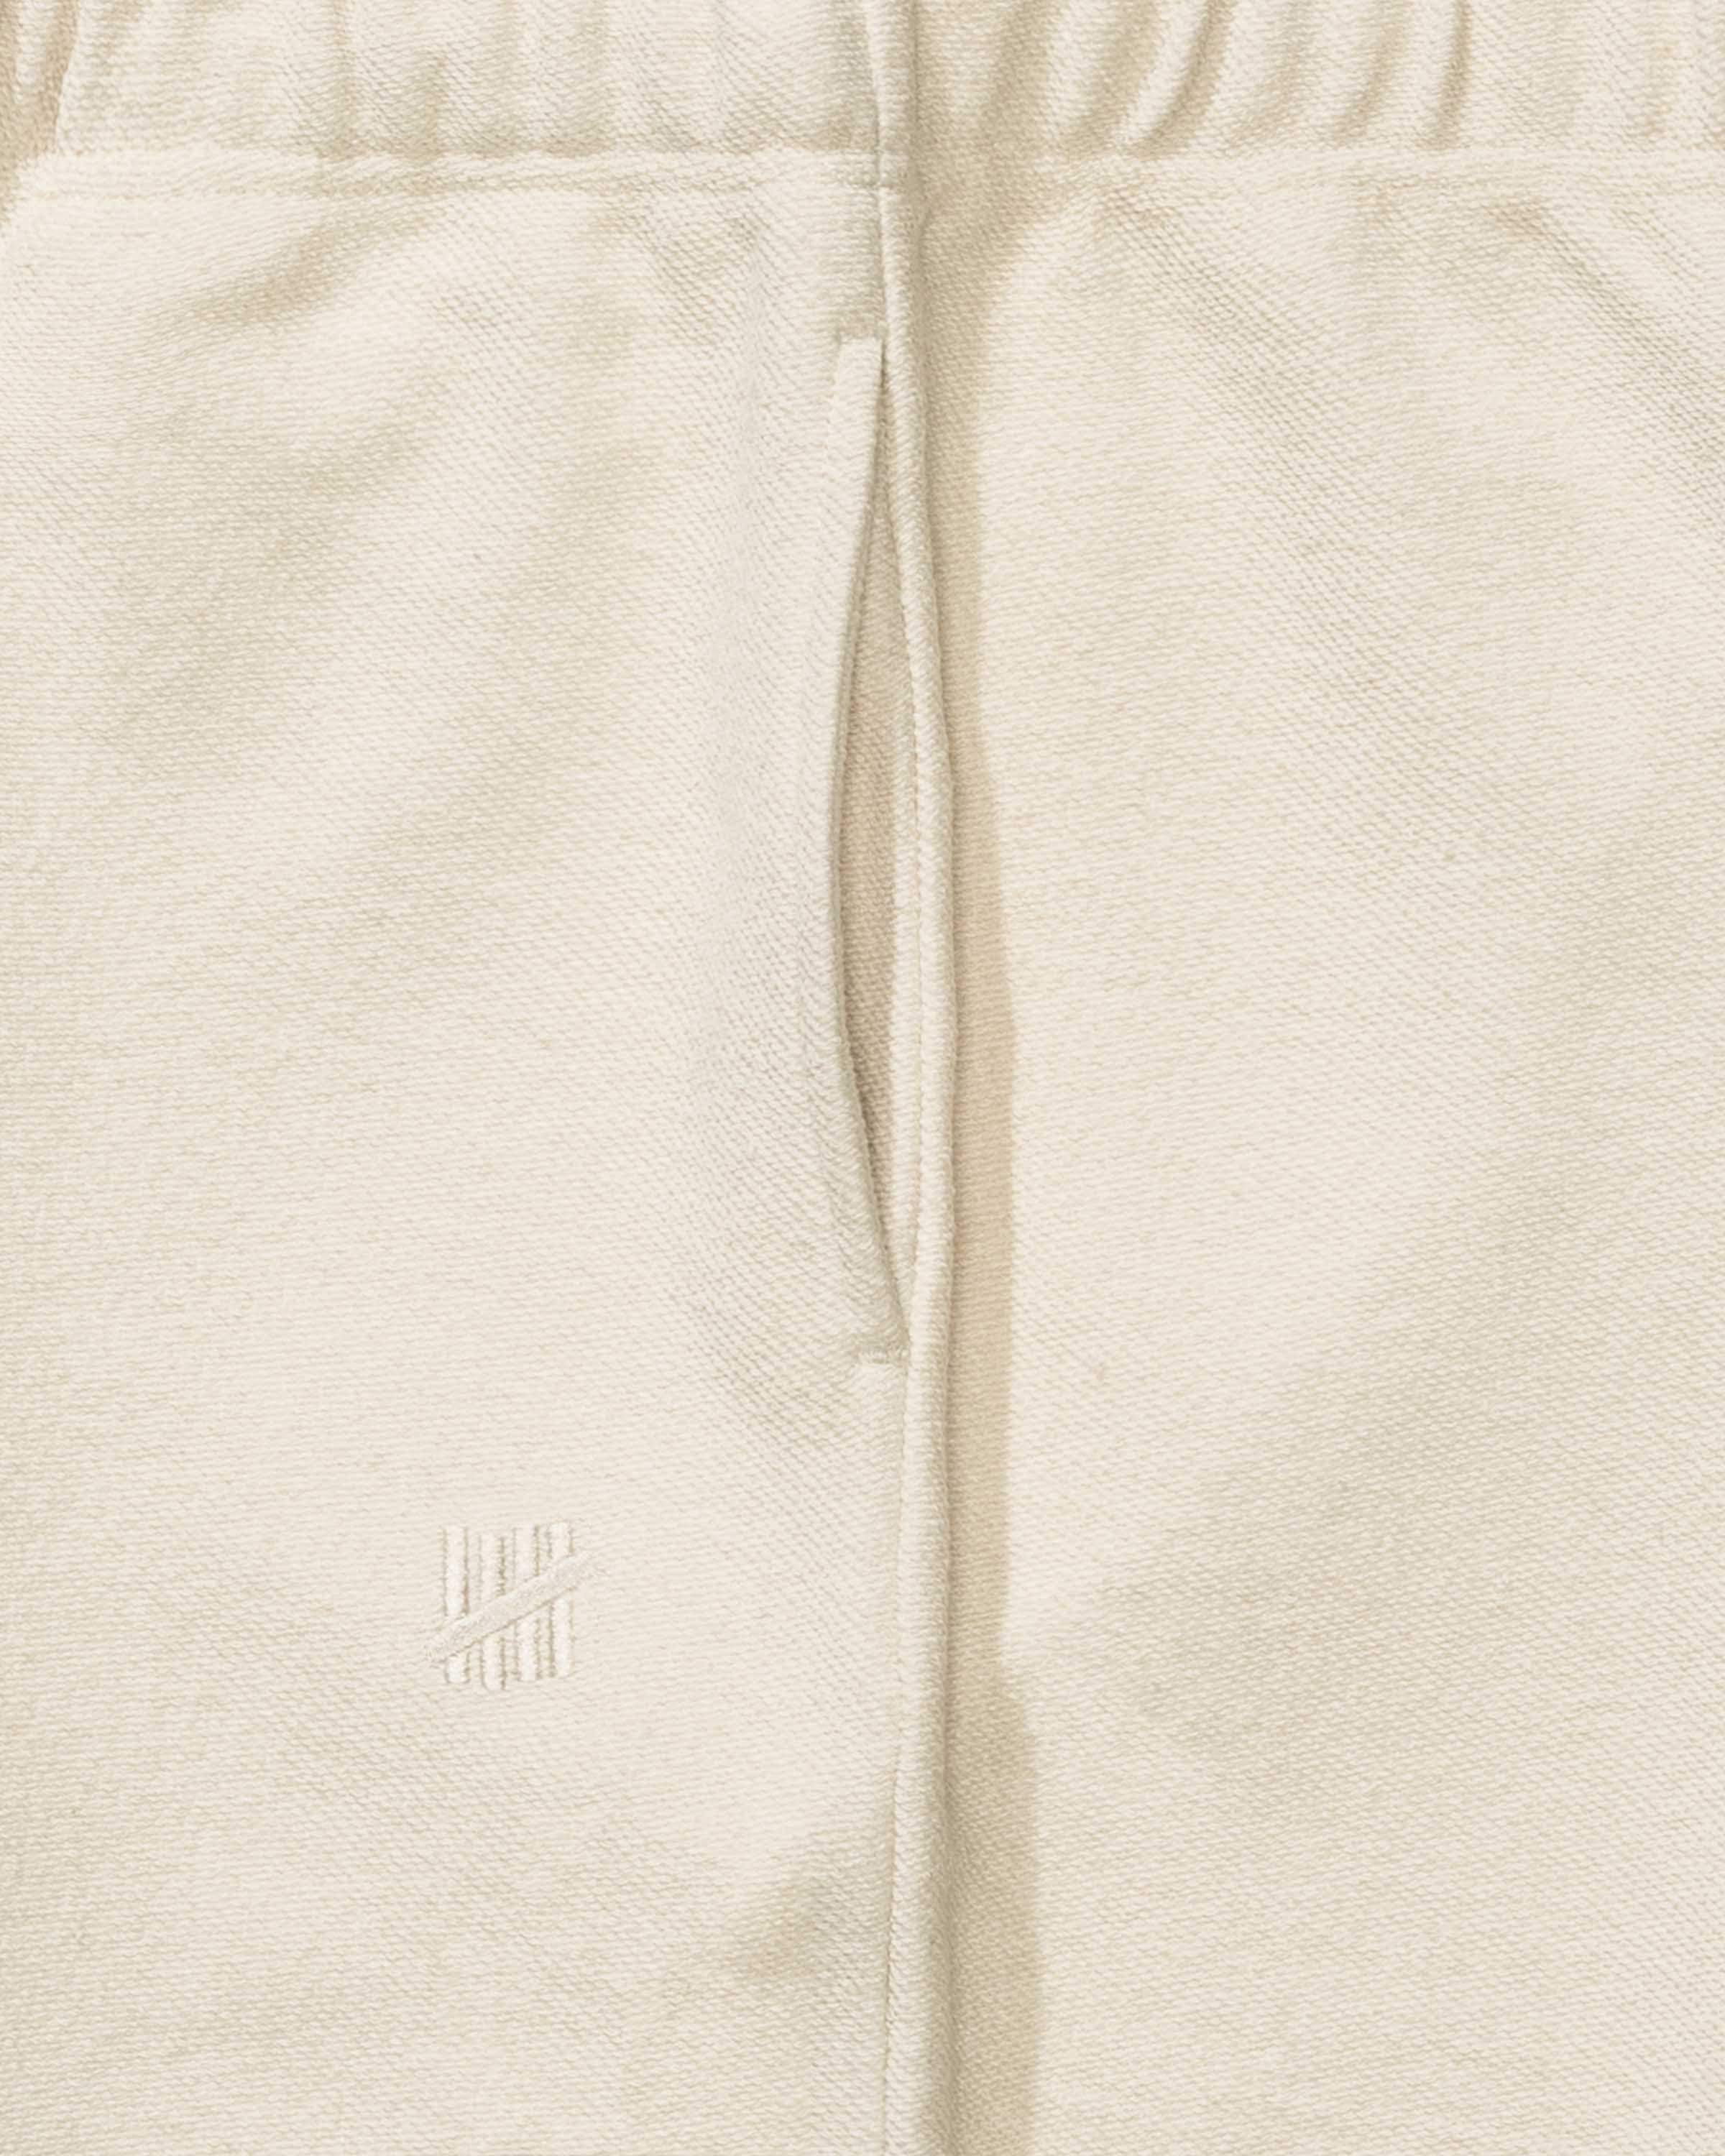 UNDEFEATED REVERSE TERRY ZIP SWEATPANT – Undefeated